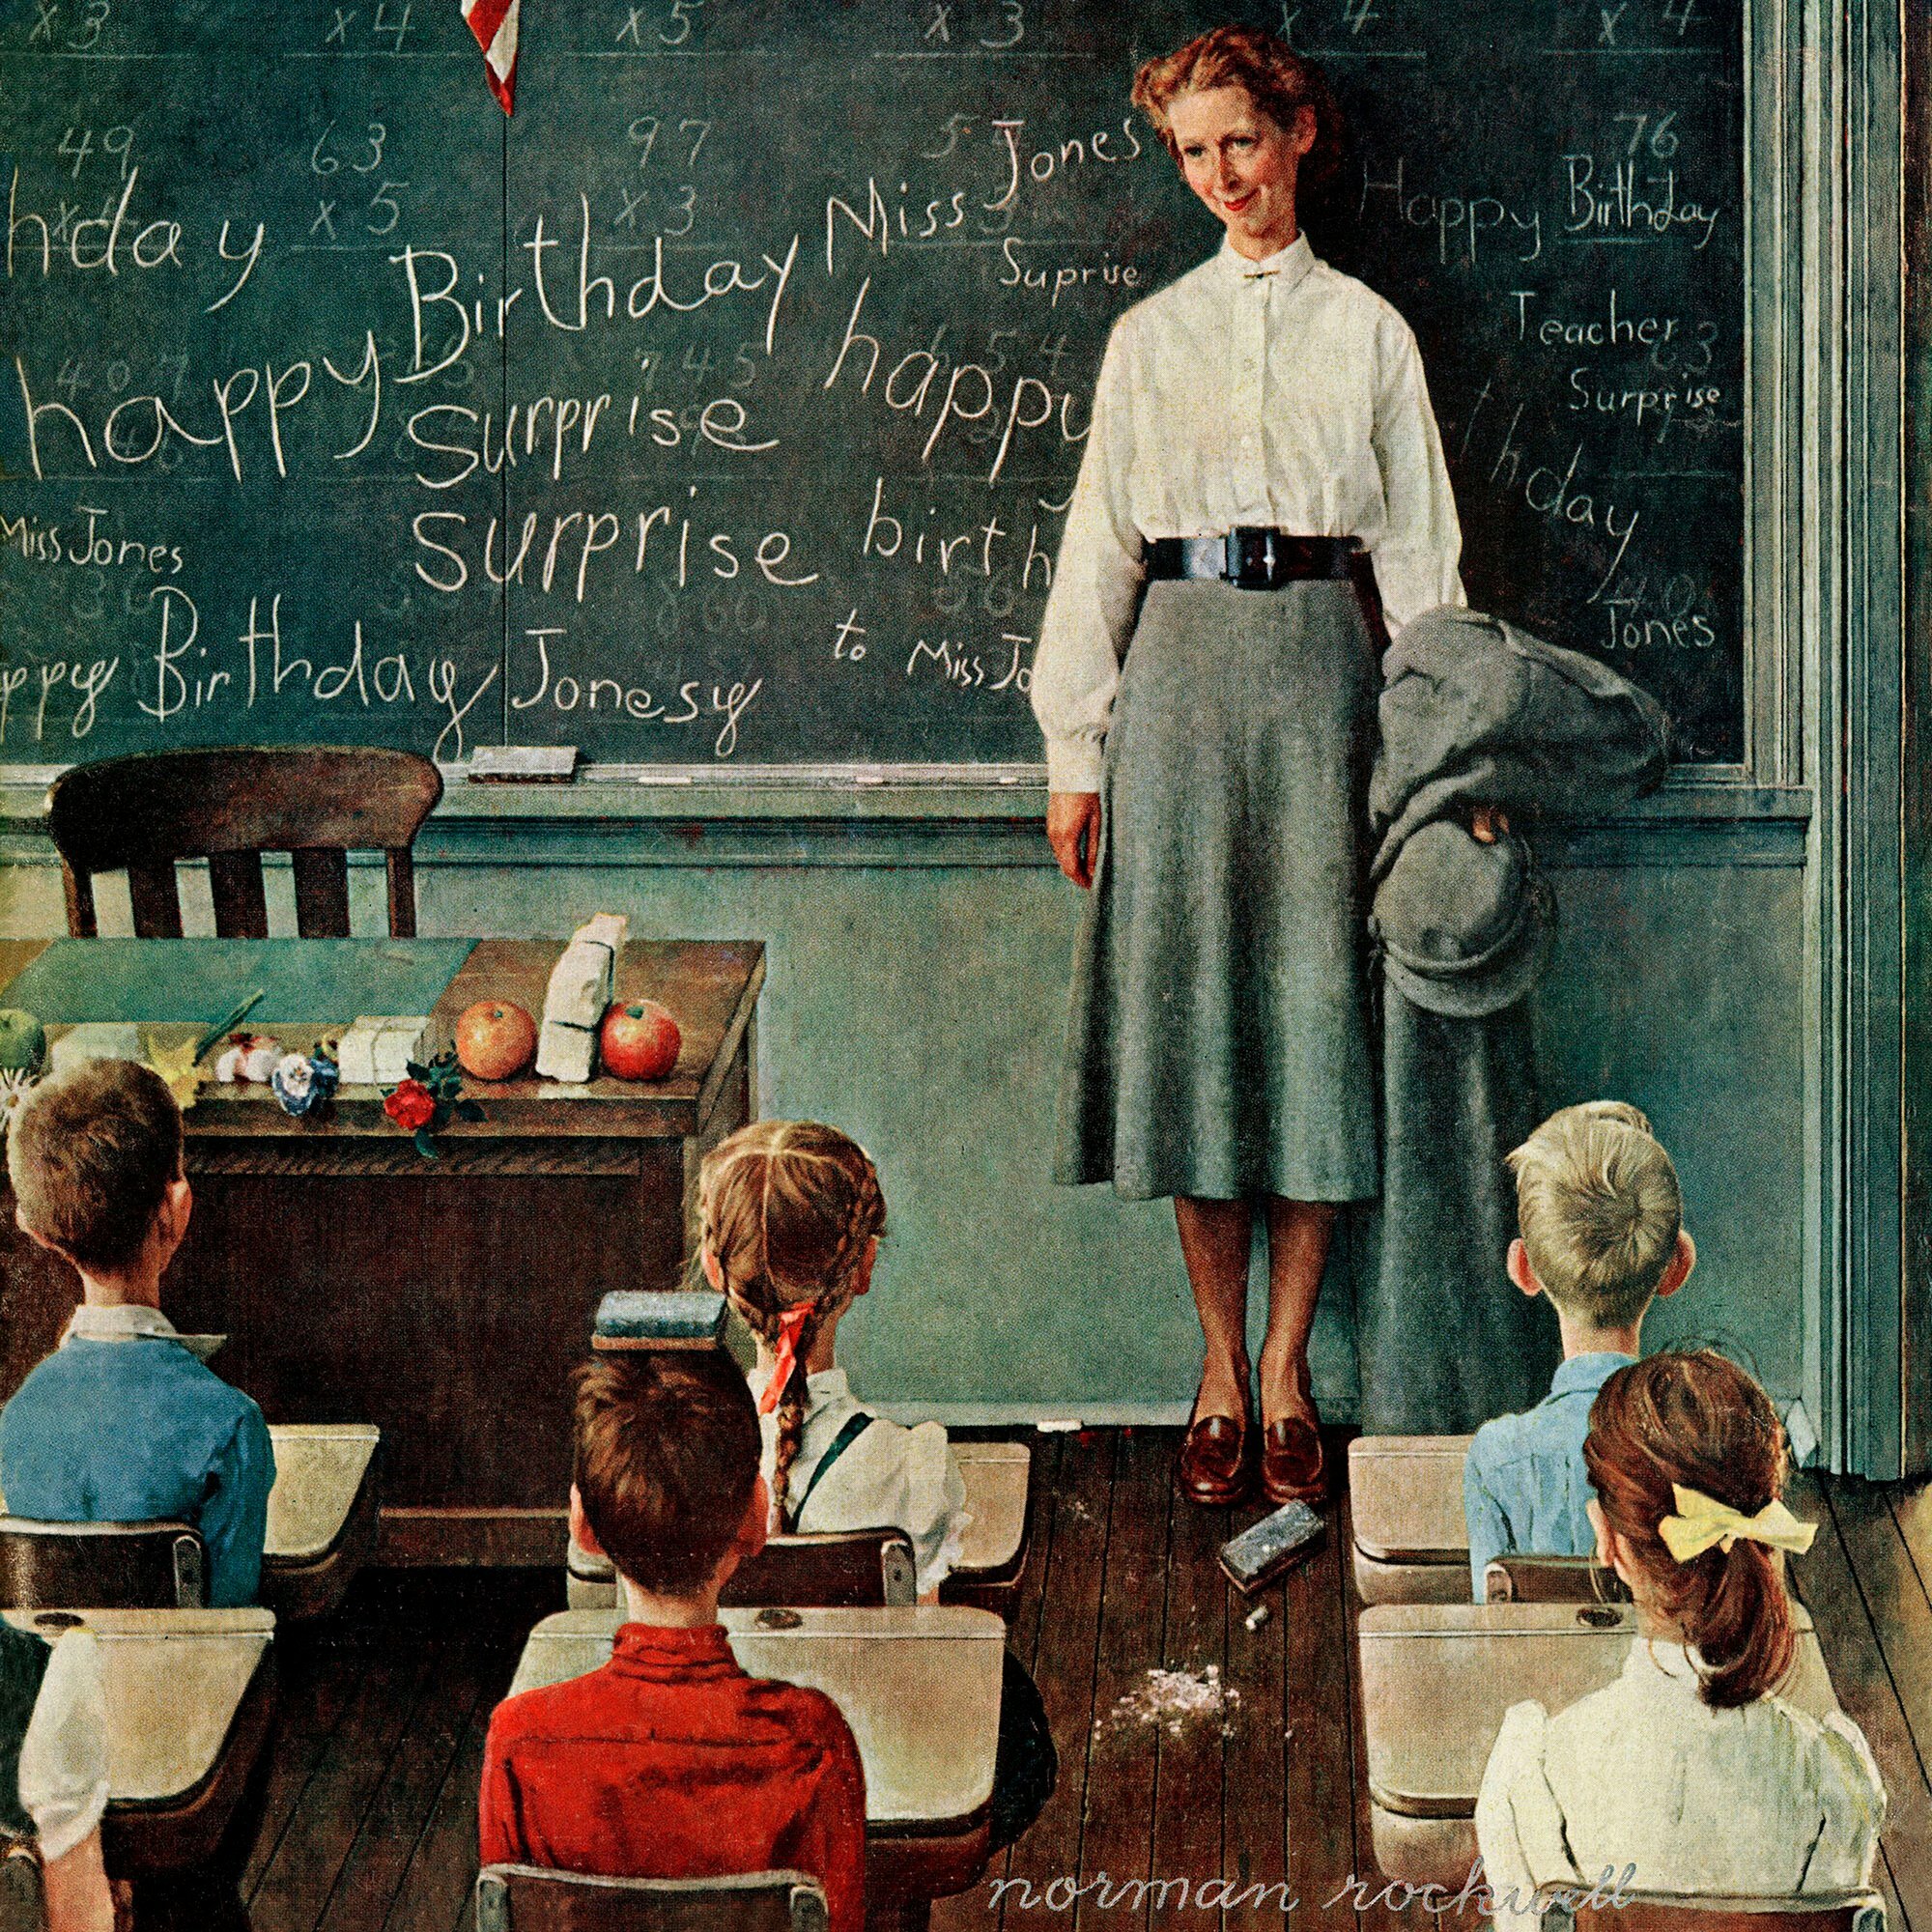 happy-birthday-miss-jones-by-norman-rockwell-painting-print-on-wrapped-canvas.jpg